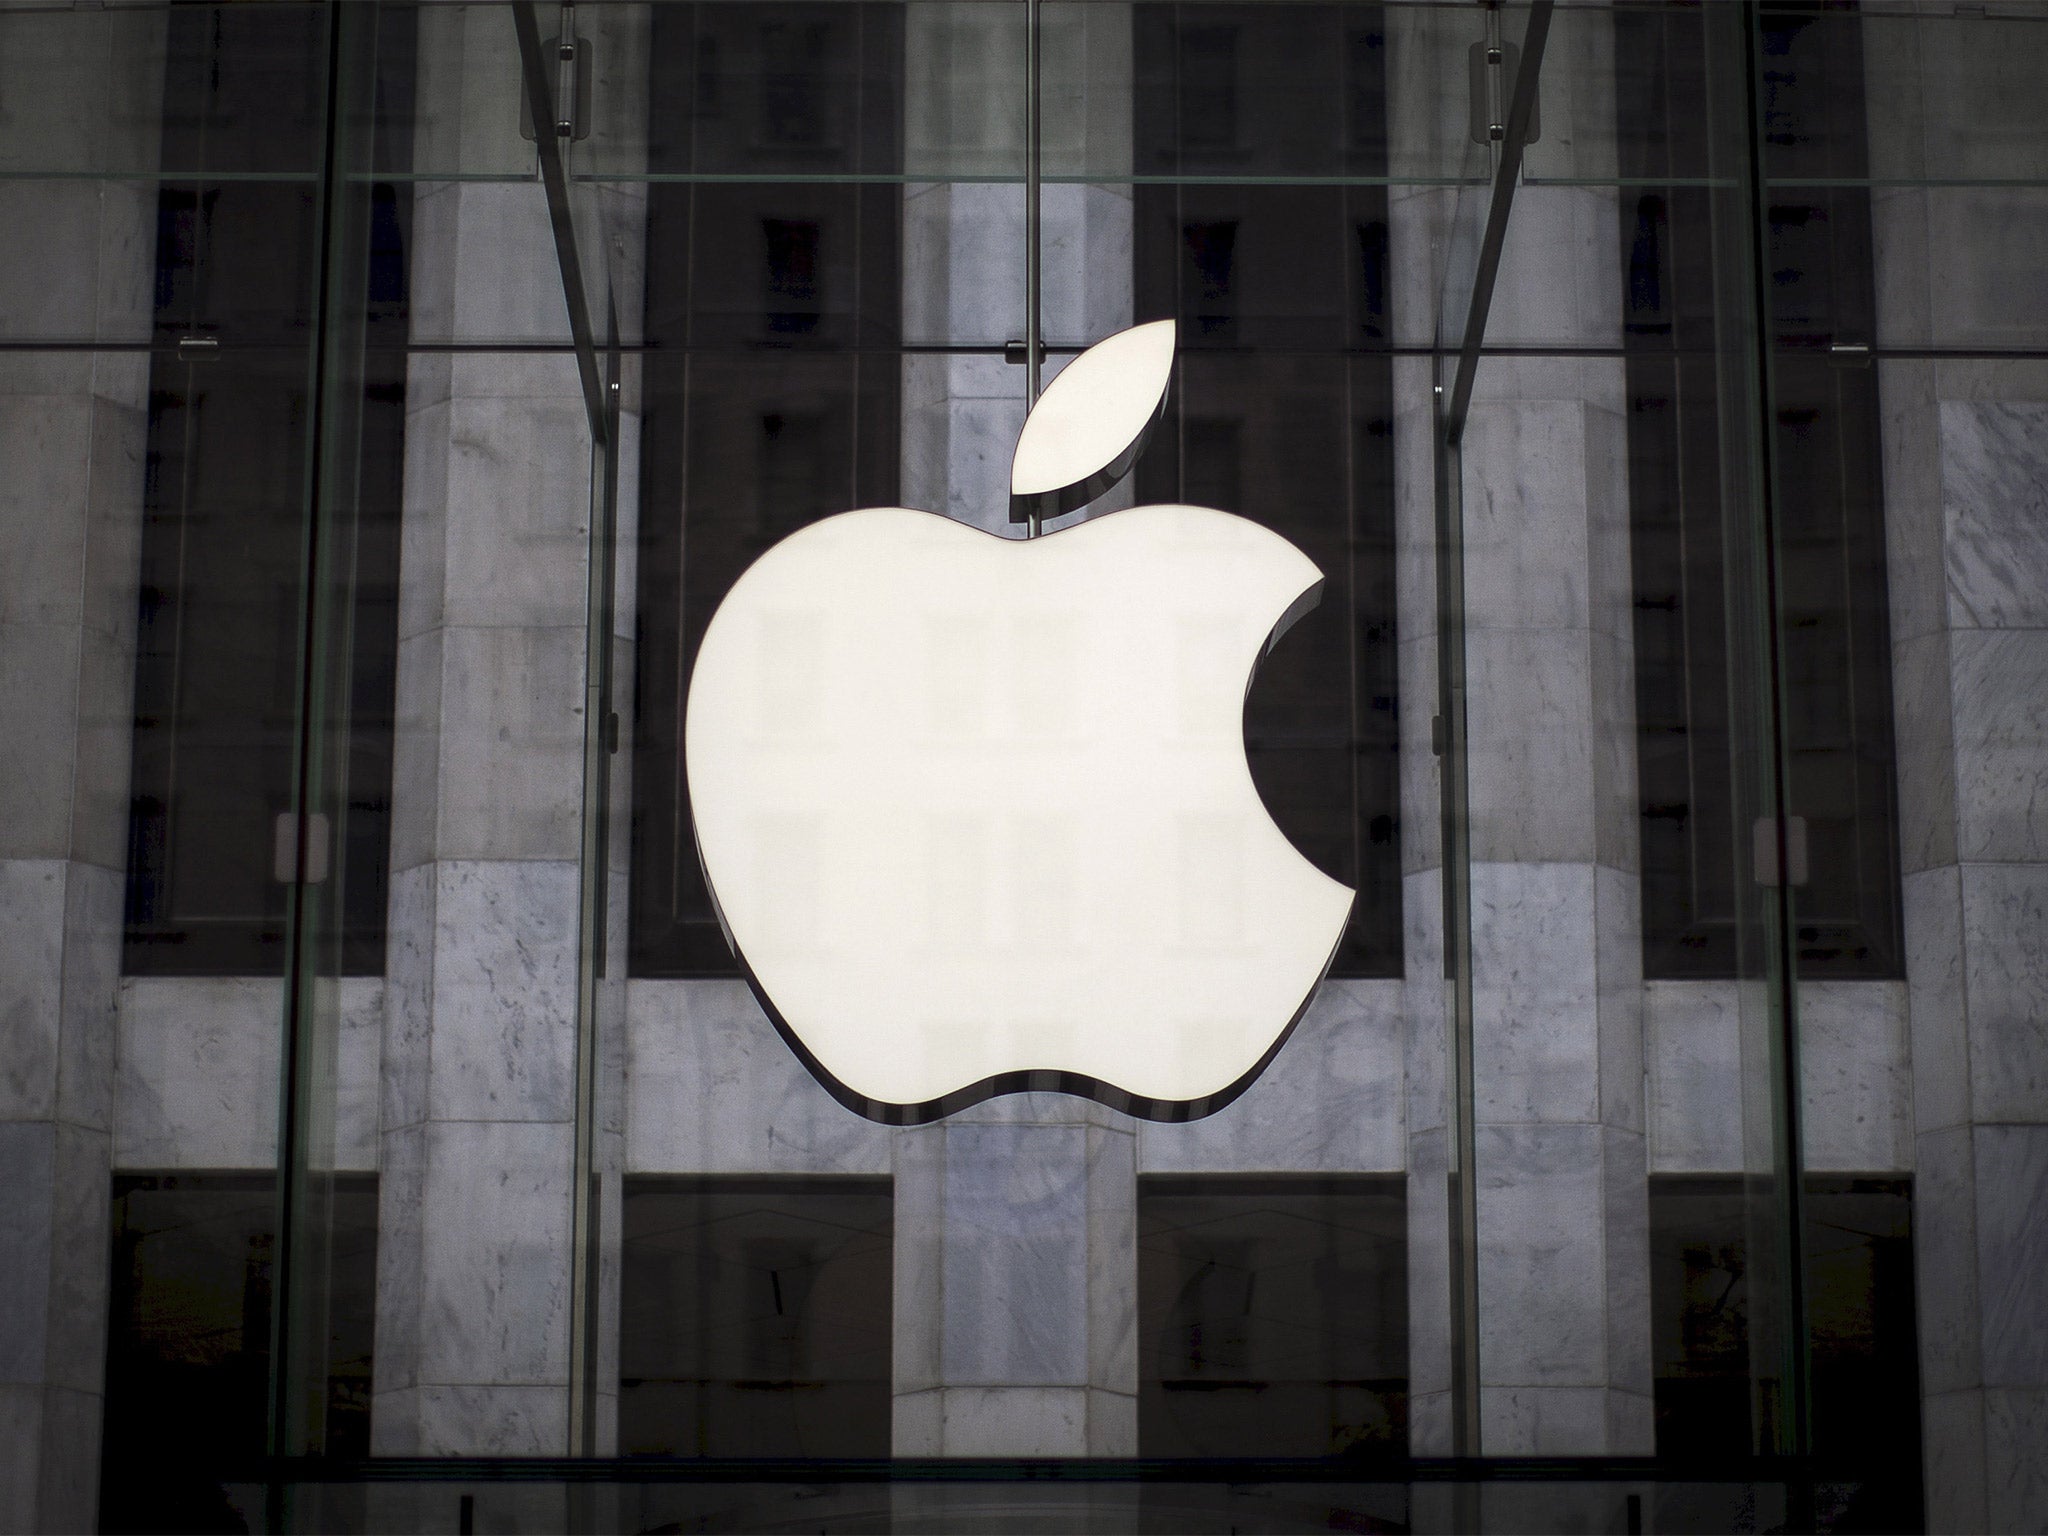 Apple is alleged to have channelled sales revenues from Italy through Ireland, which has a lower rate of corporation tax